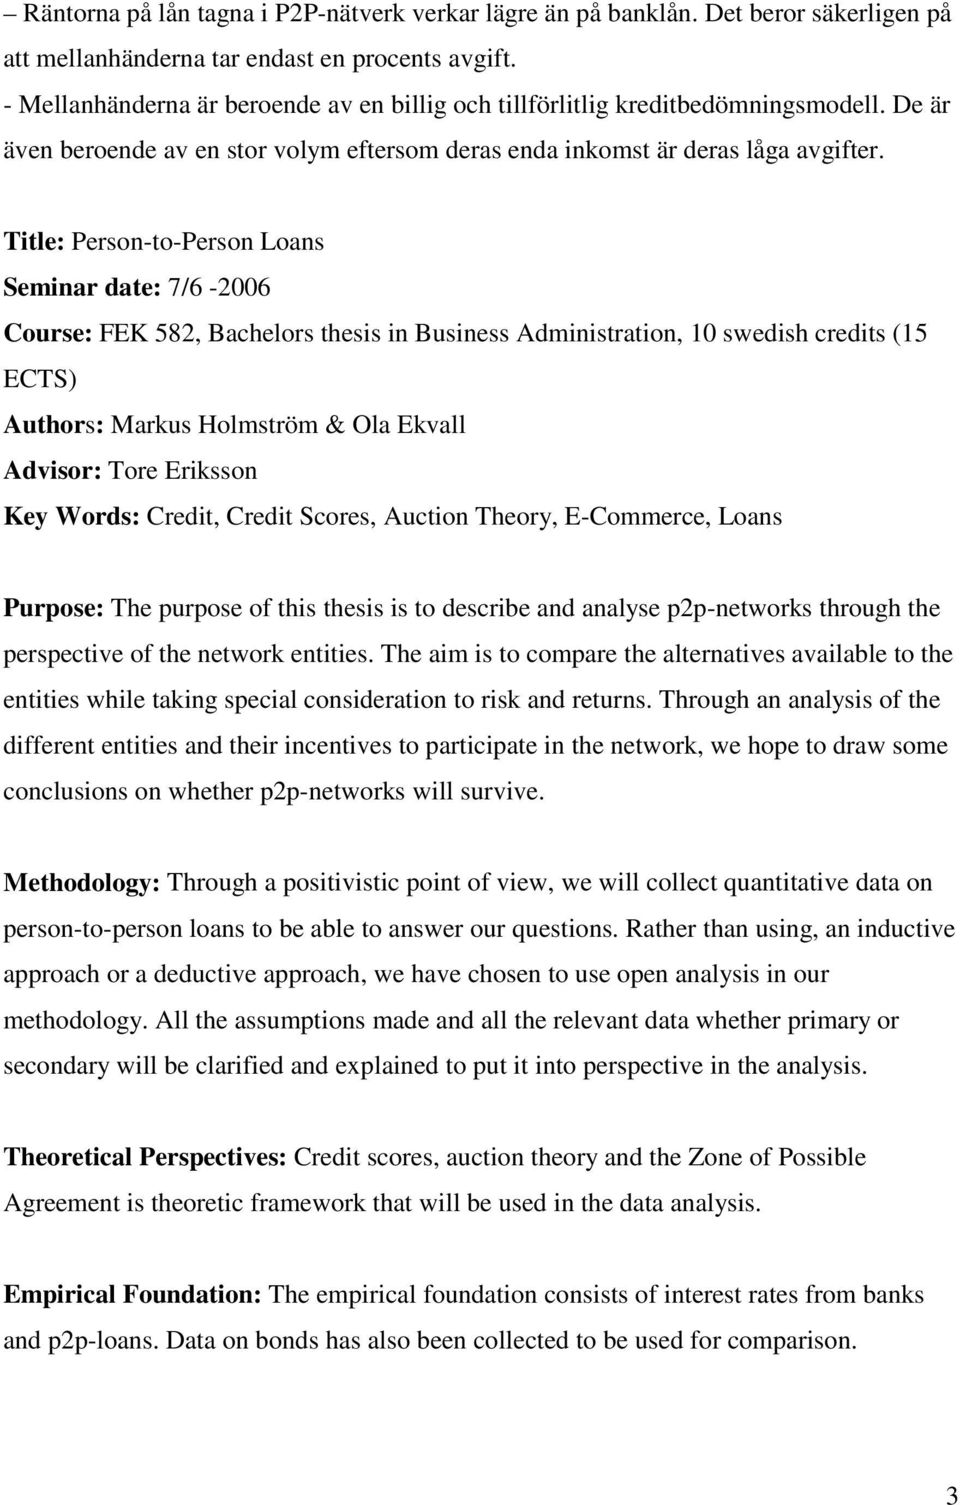 Title: Person-to-Person Loans Seminar date: 7/6-2006 Course: FEK 582, Bachelors thesis in Business Administration, 10 swedish credits (15 ECTS) Authors: Markus Holmström & Ola Ekvall Advisor: Tore